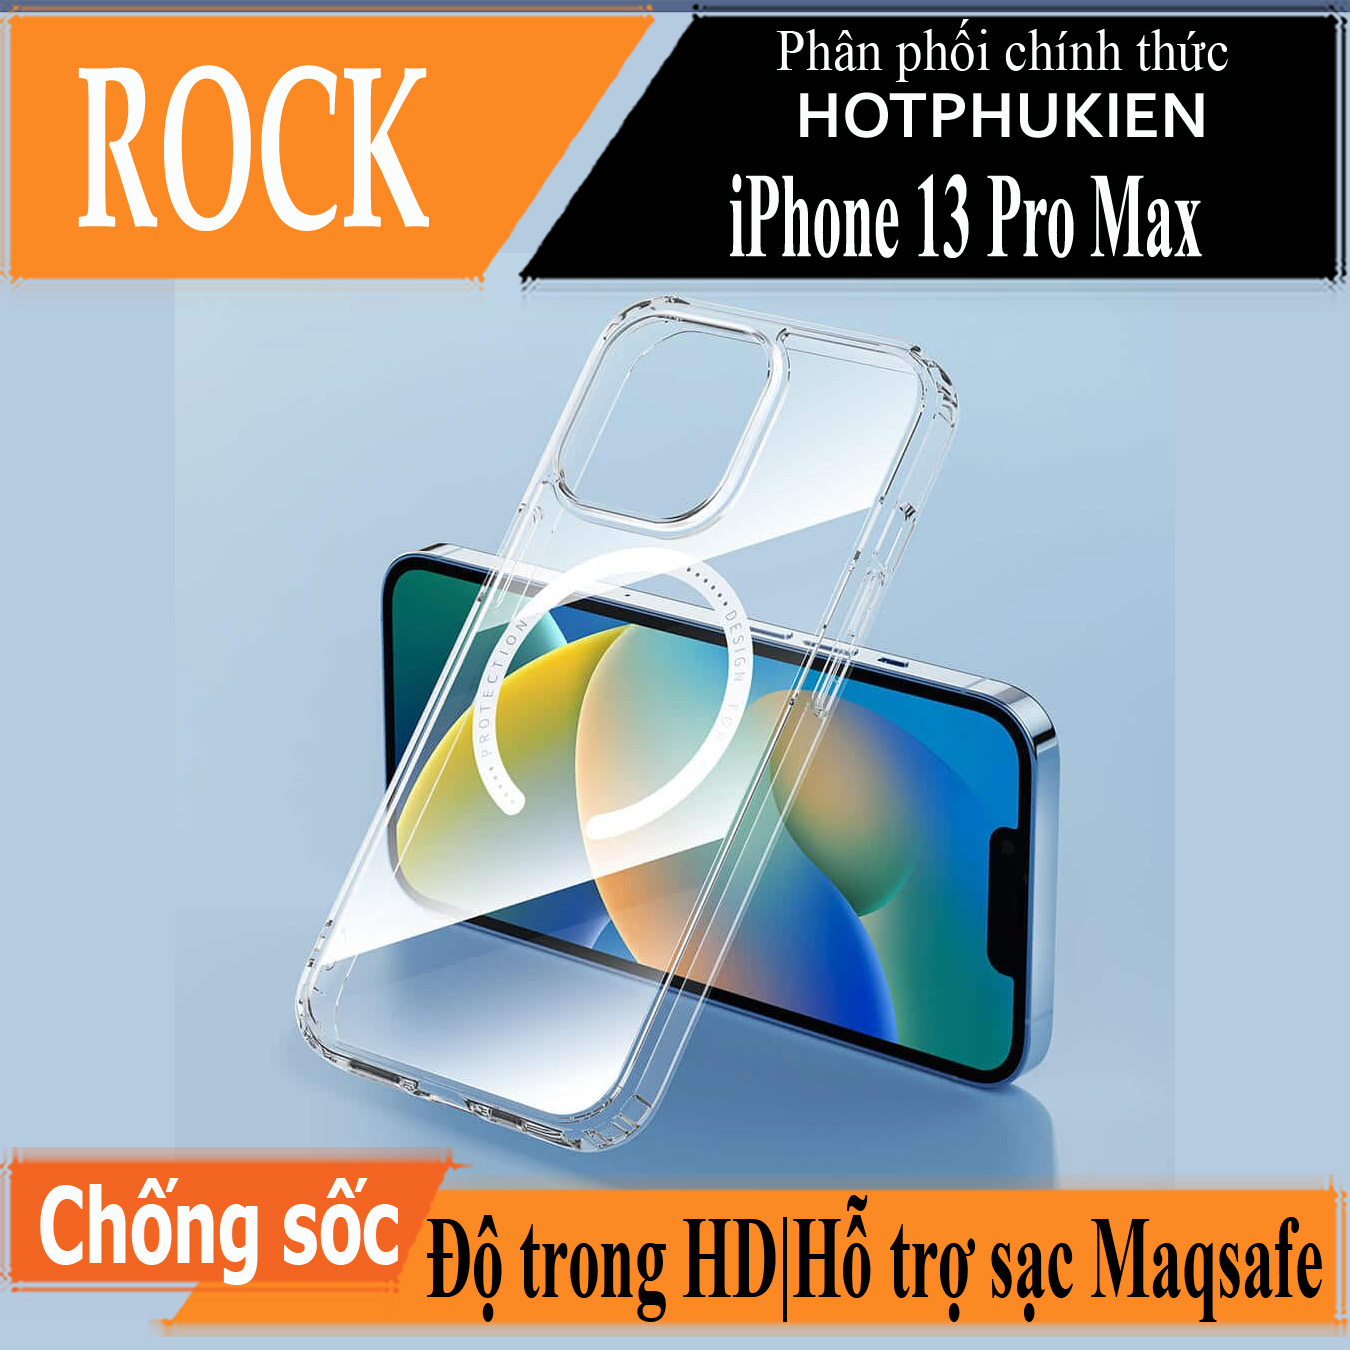 Ốp lưng chống sốc trong suốt hỗ trợ sạc Magsafe cho iPhone 13 Pro Max (6.7 inch) hiệu Rock Protection Maqsafe Magetic Case